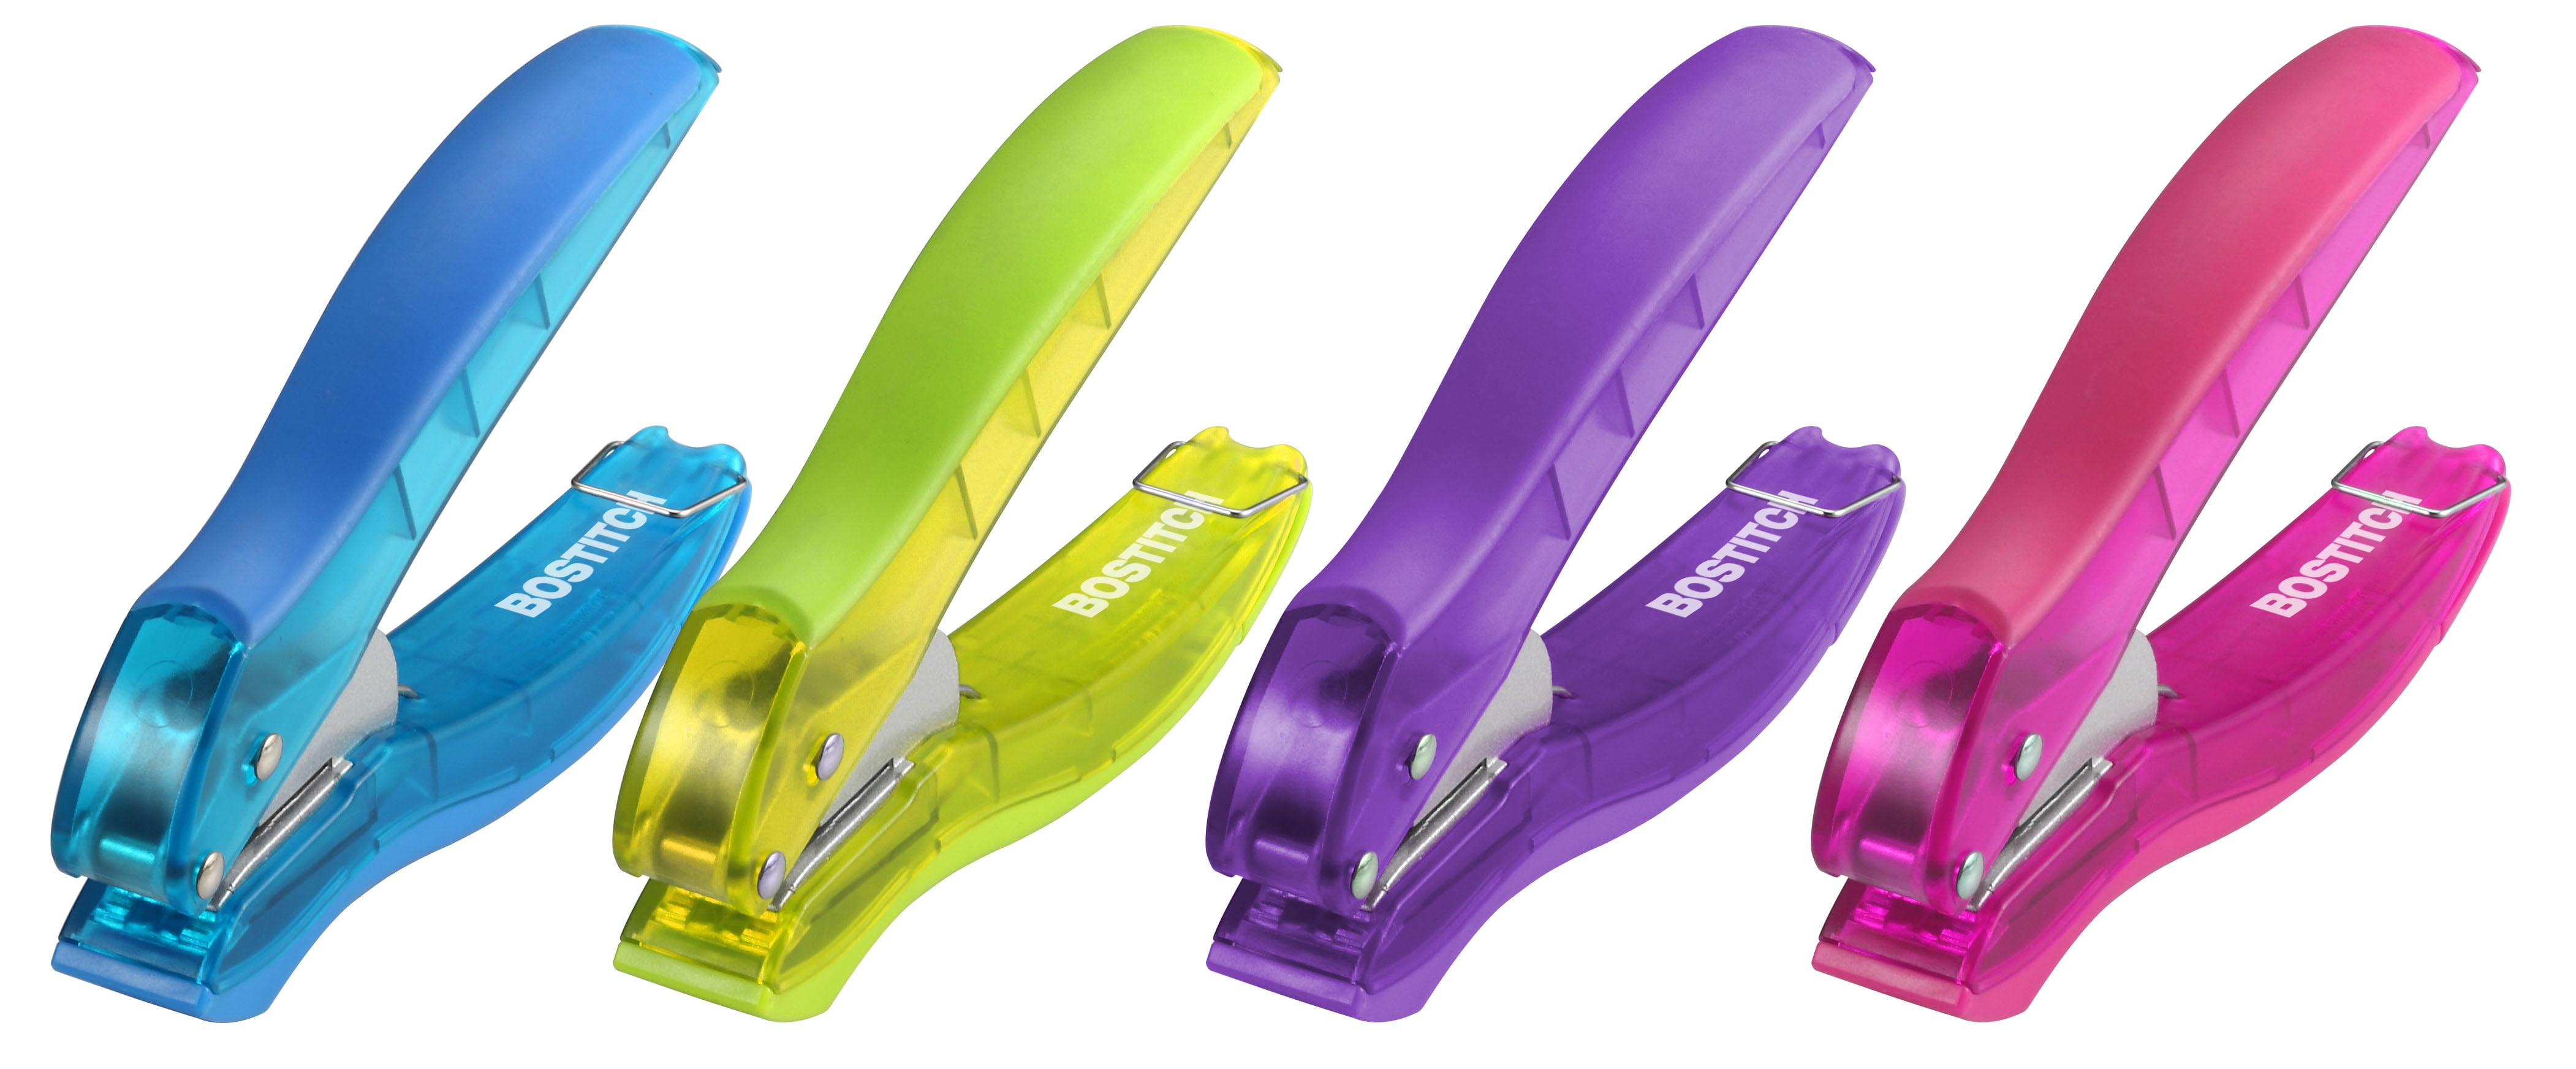 PaperPro inLIGHT 10 Reduced Effort One-Hole Punch, Assorted Colors